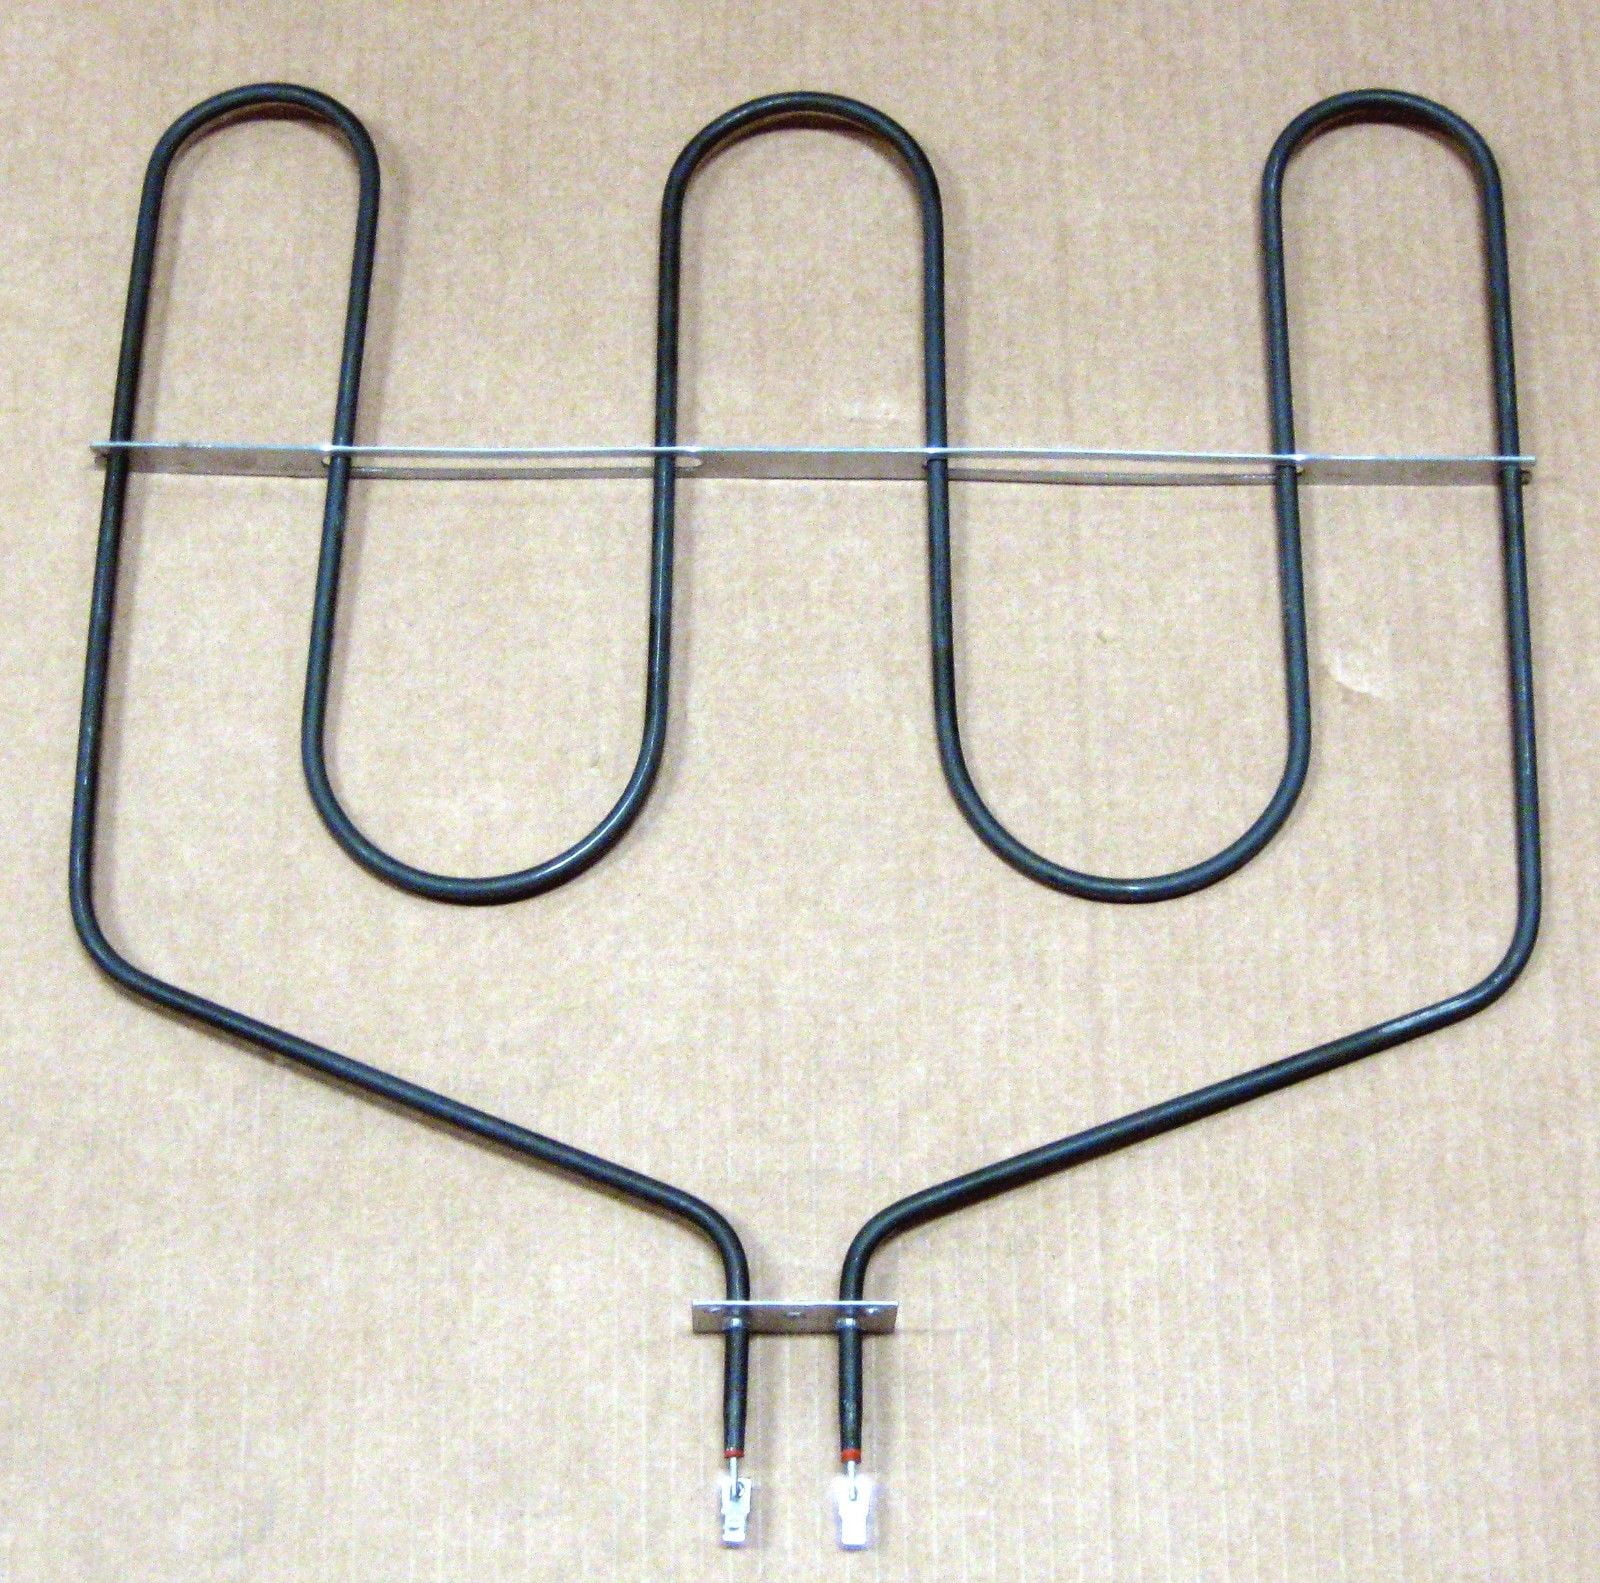 CH5142 for Tappen Frigidaire 5303051140 Range Oven Broil Unit Heating Element 